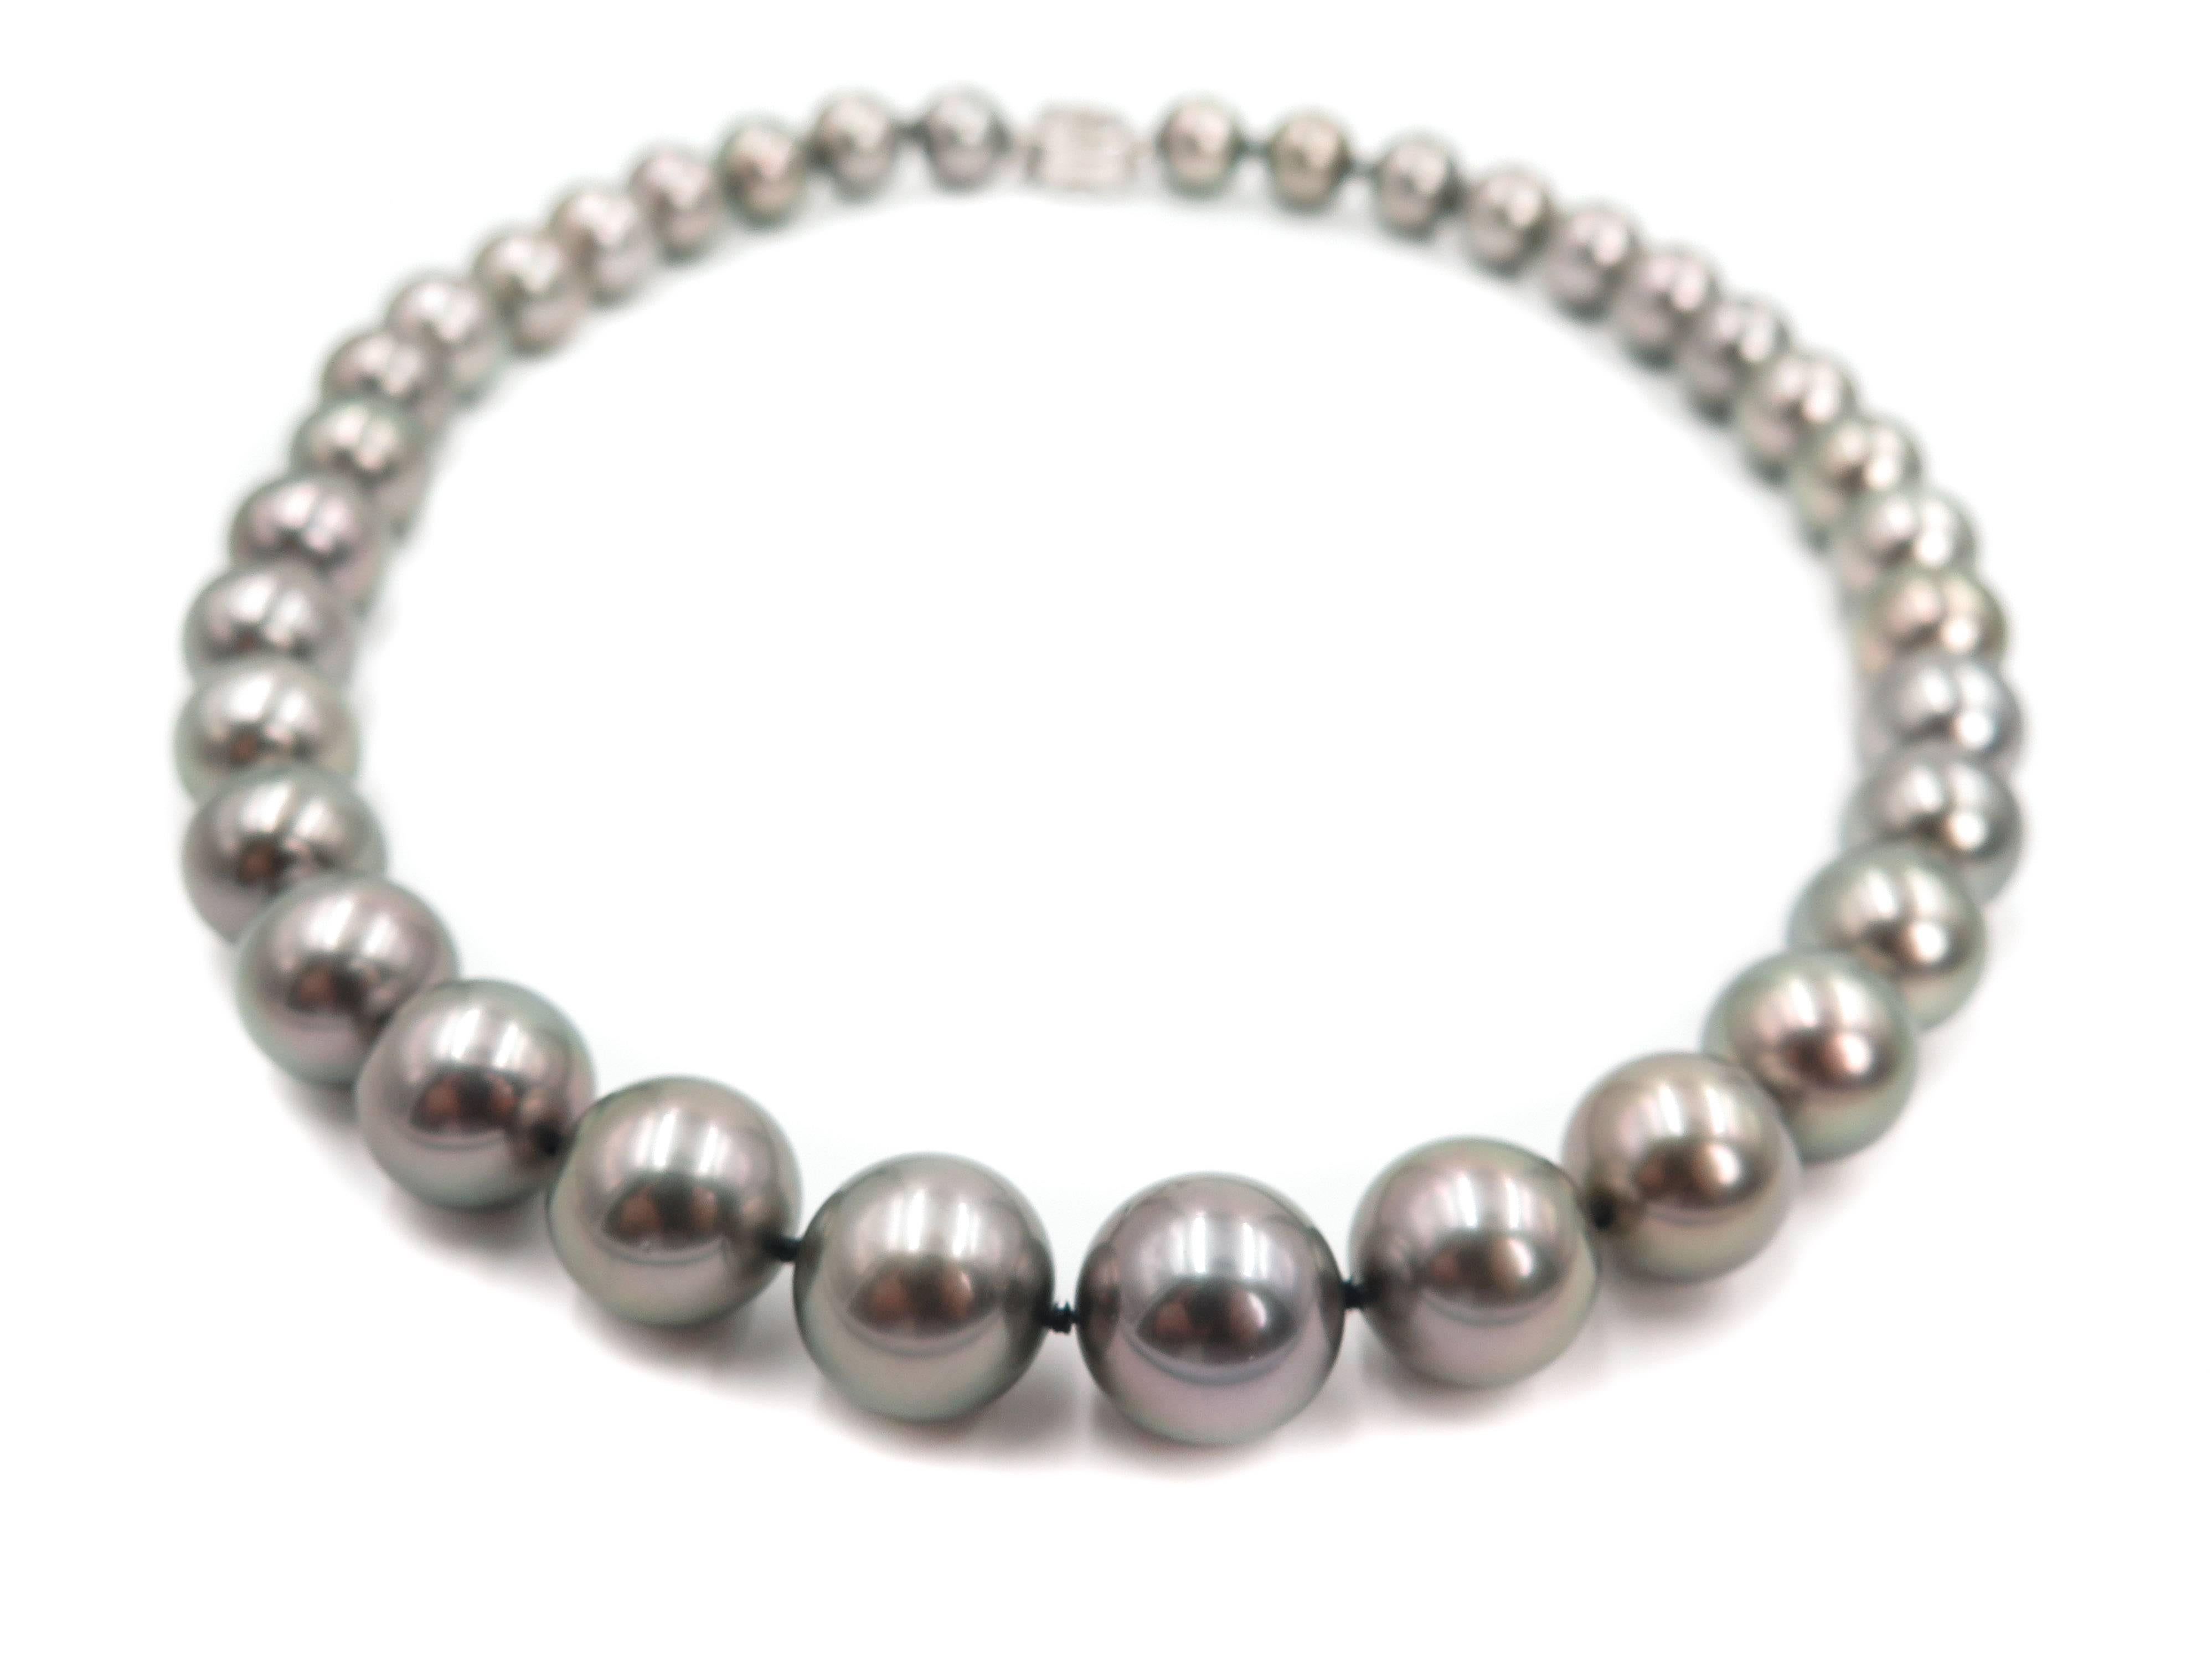 South Sea cultured pearls are impressively large in size and come in a dazzling array of natural colors. Because of varieties in color, shape and size, it can take years to assemble a harmoniously matched strand. 
This 17 inch strand of gorgeous